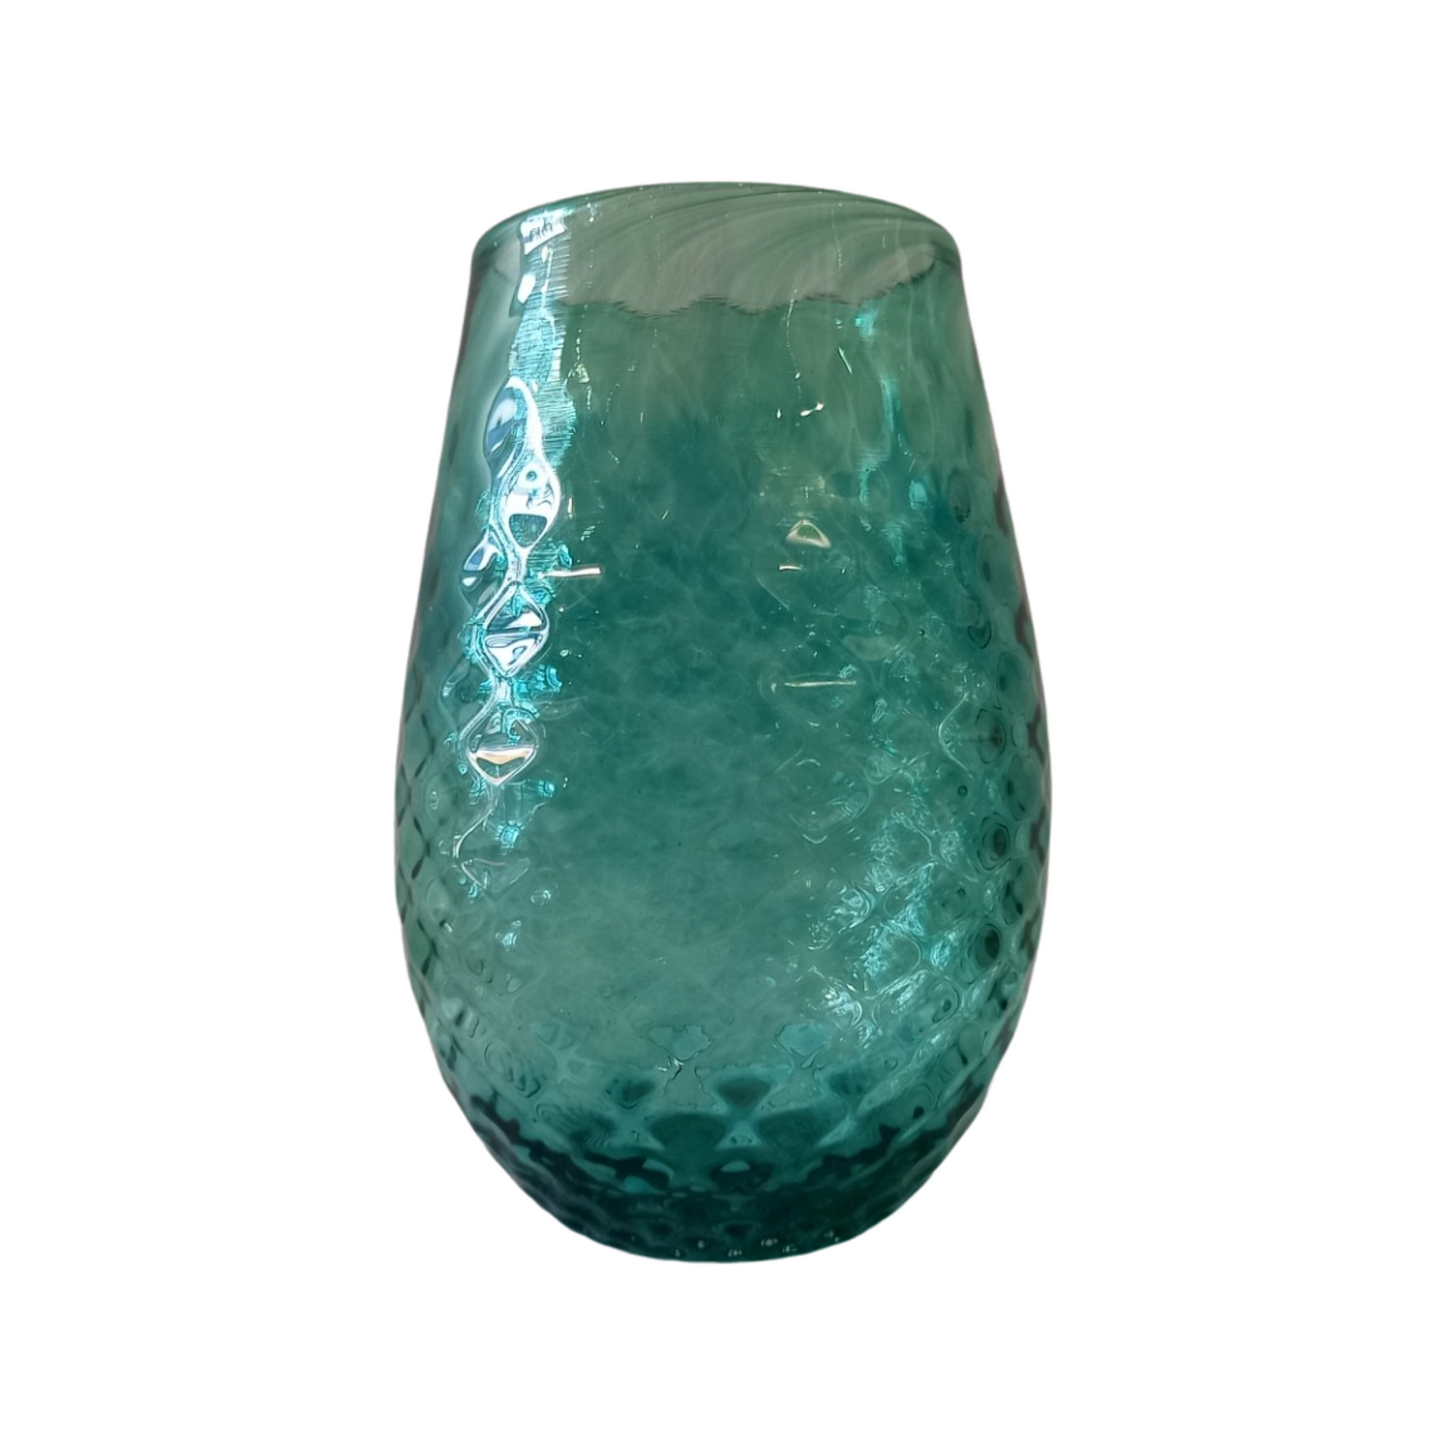 Stemless Dimpled wine glass